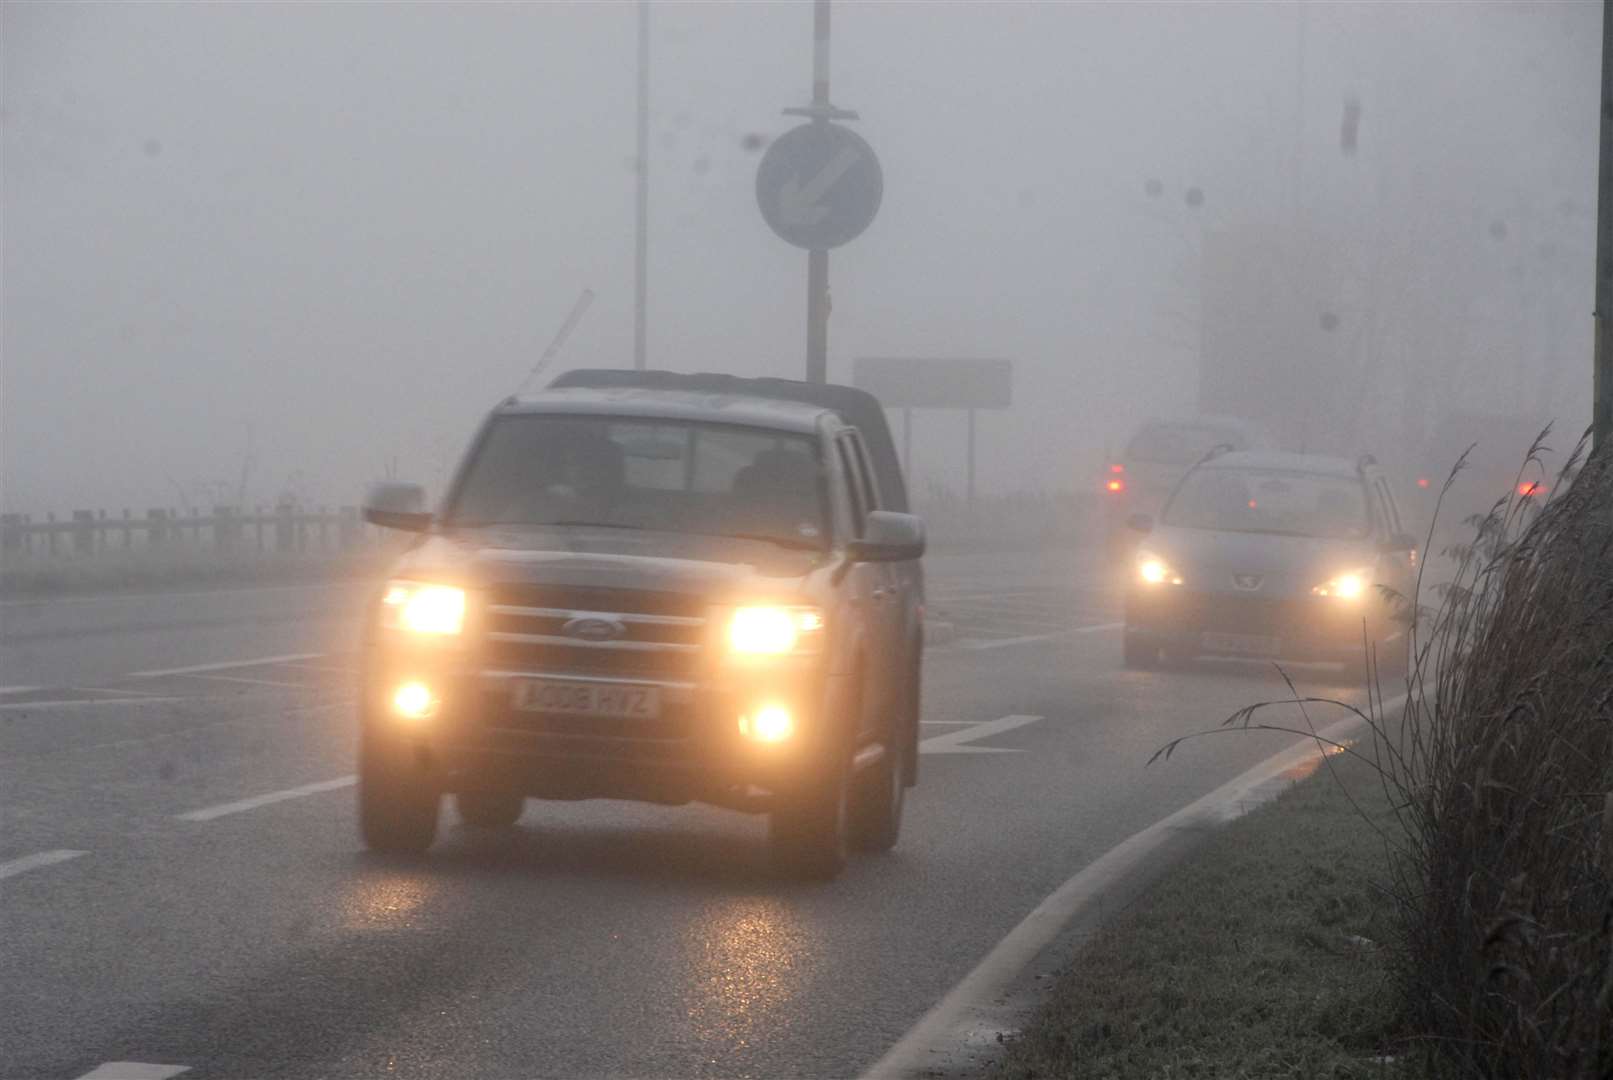 Foggy conditions are expected across the county. Stock image.